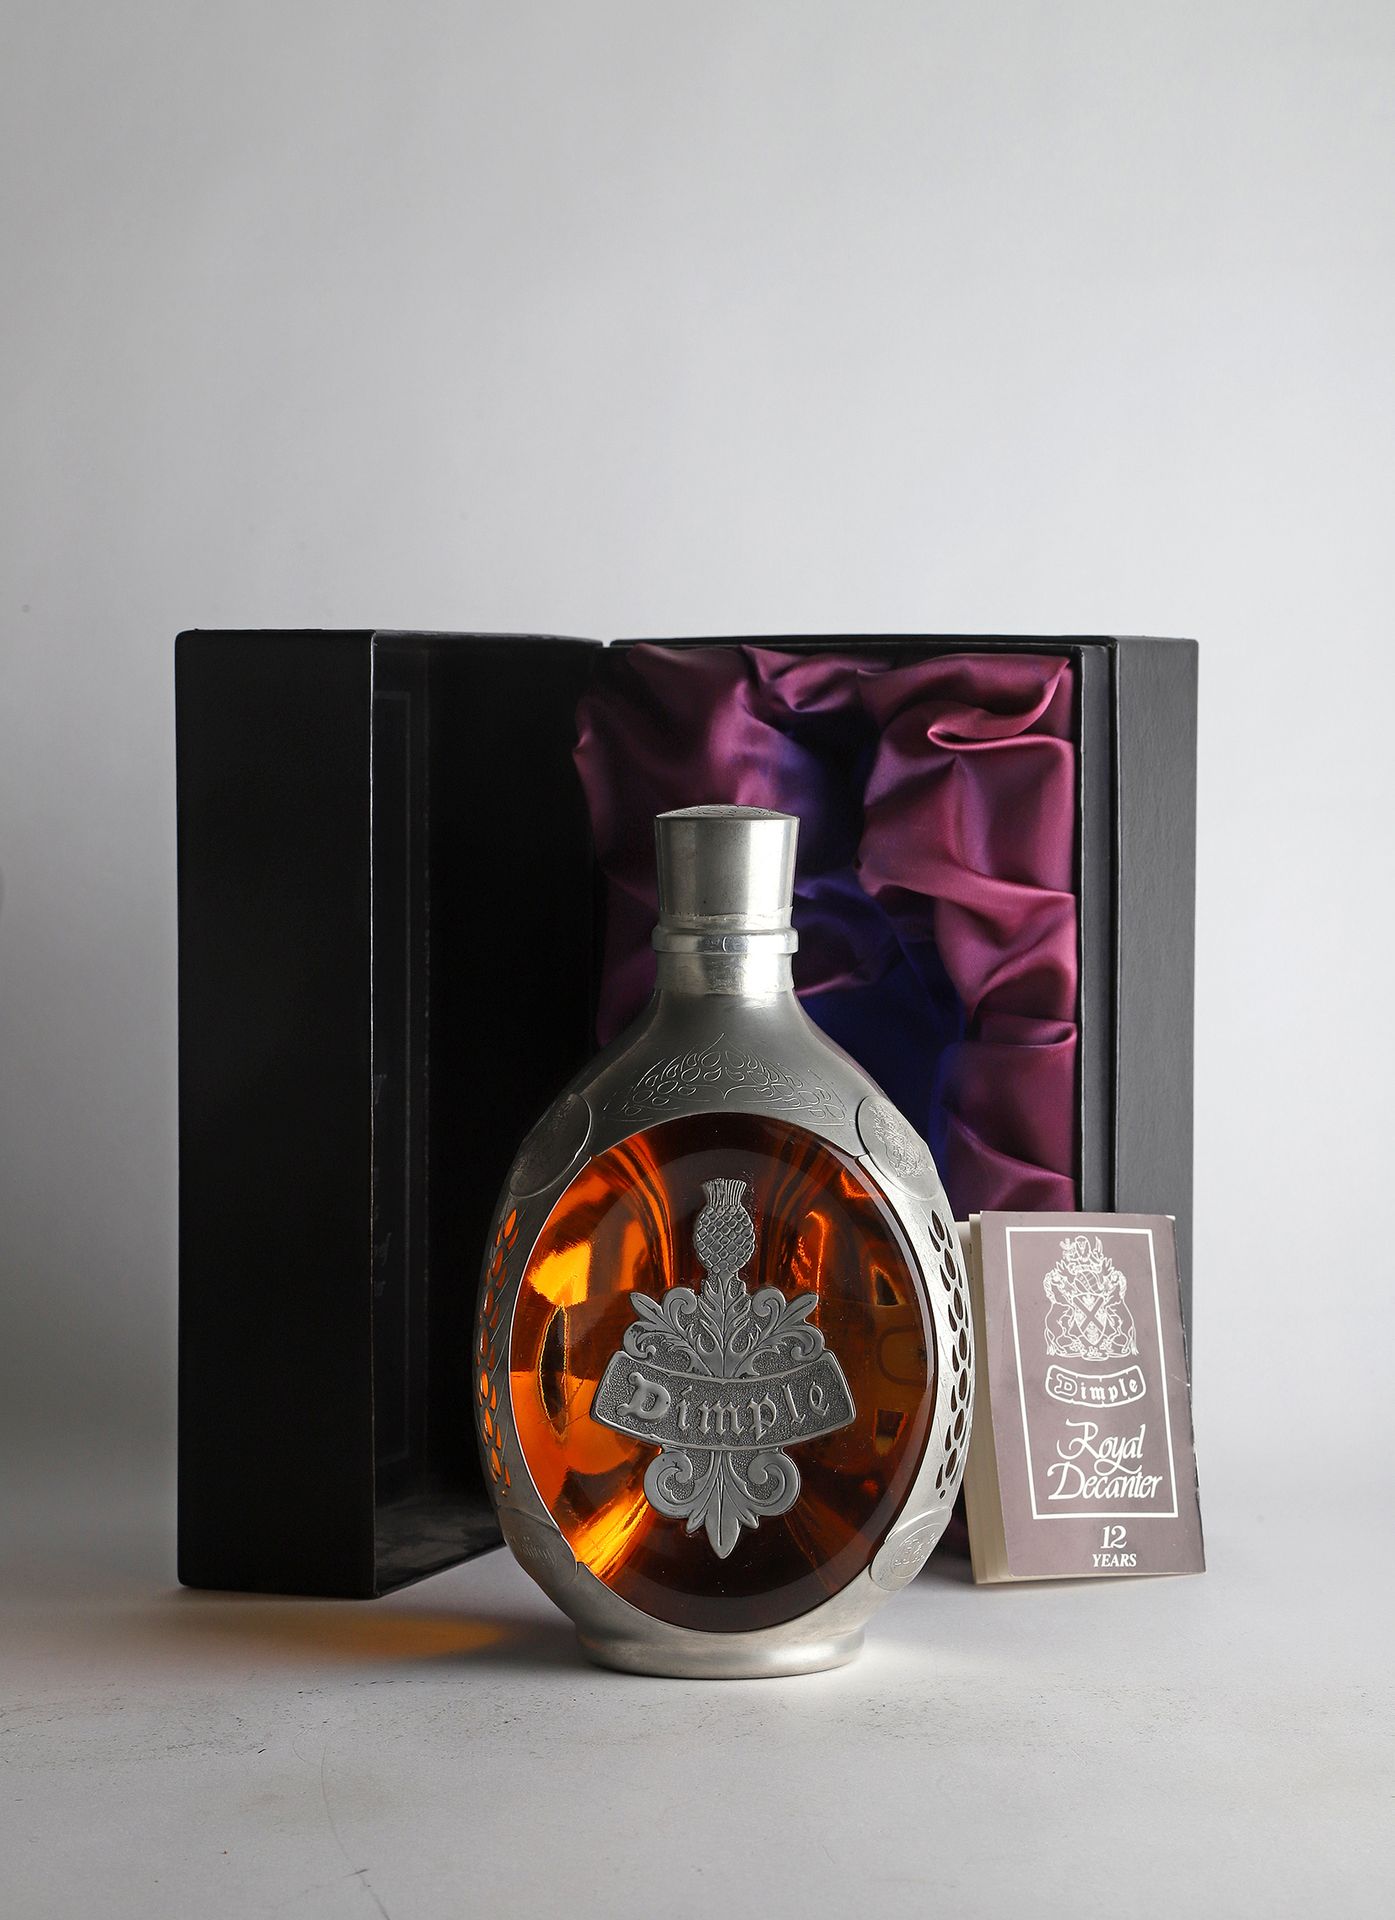 Null 1 B WHISKY ROYAL DECANTER 12 YEARS OLD 75 cl 43% (Original box) - NM - Dimp&hellip;